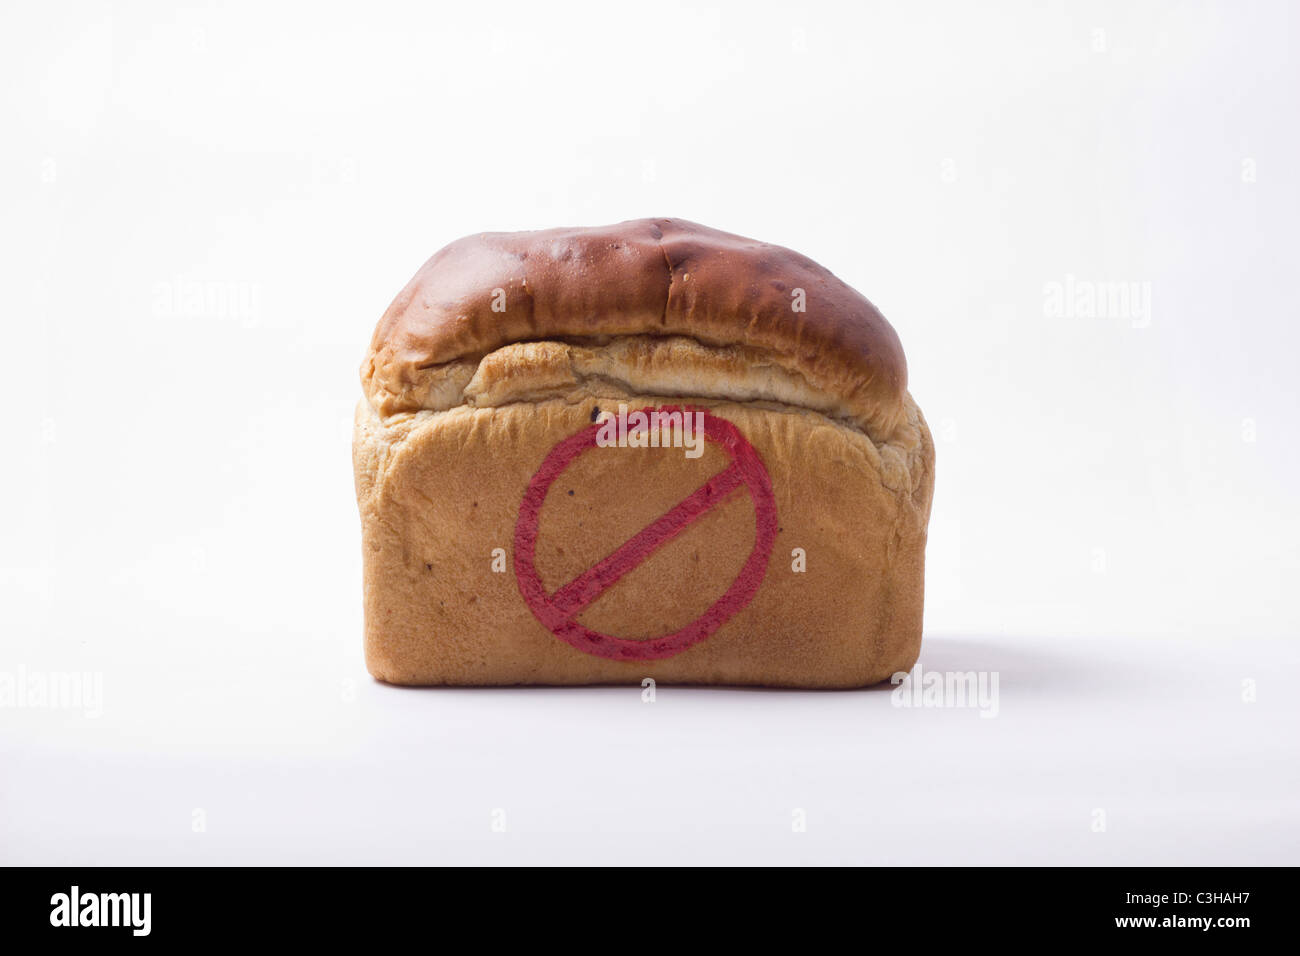 TRADITIONAL LOAF OF BREAD WITH A WARNING SIGN PAINTED ON IN RED Stock Photo